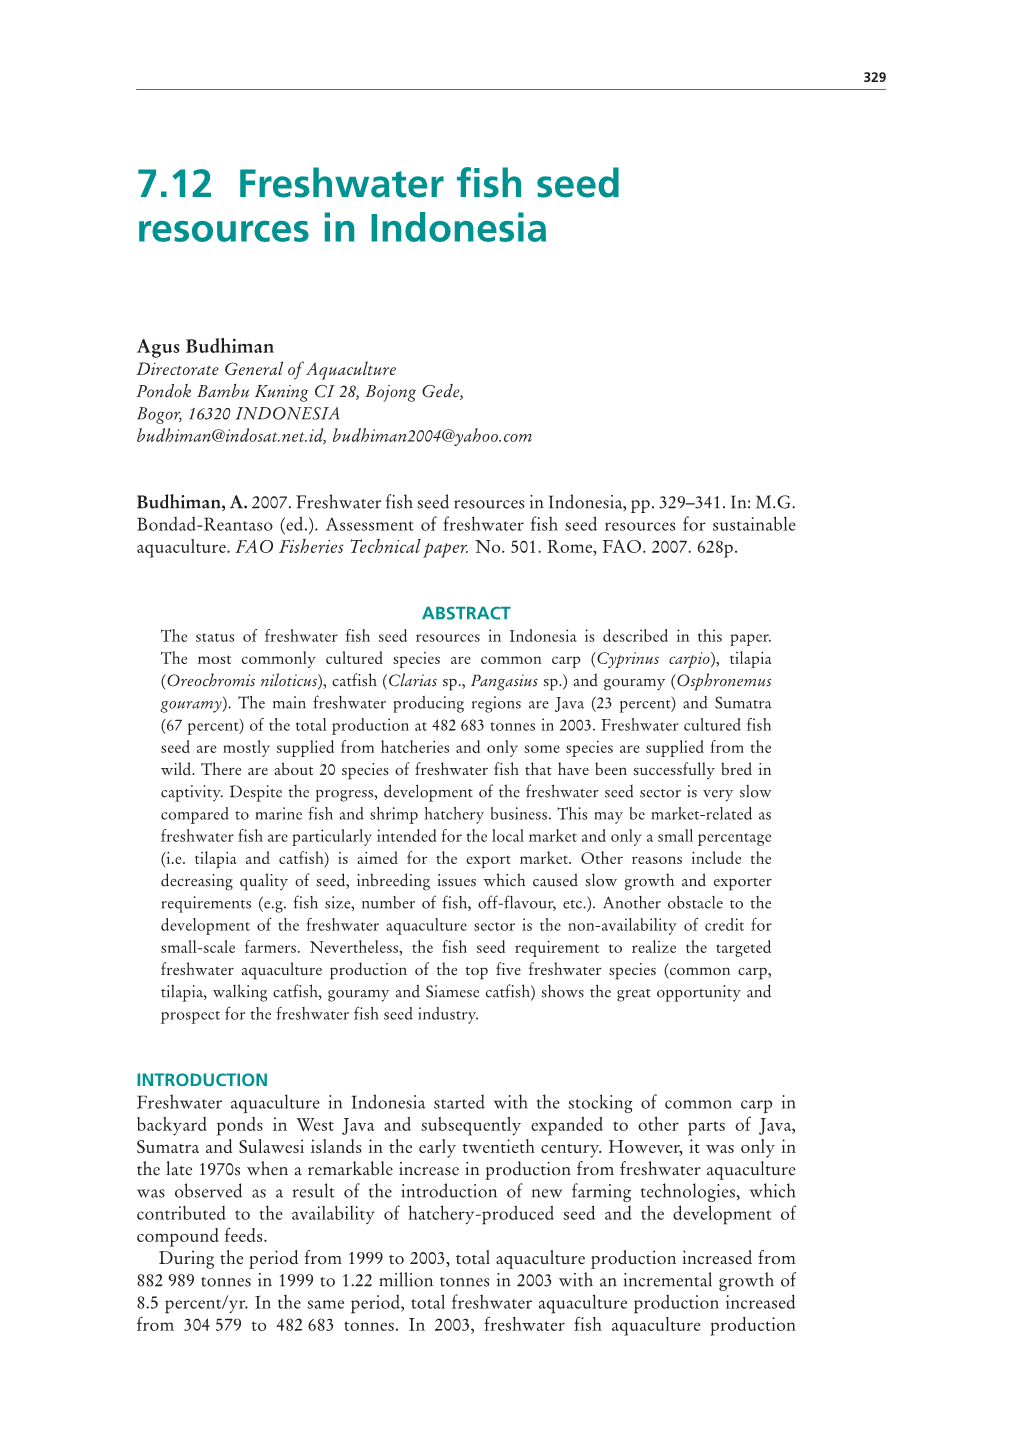 7.12 Freshwater Fish Seed Resources in Indonesia